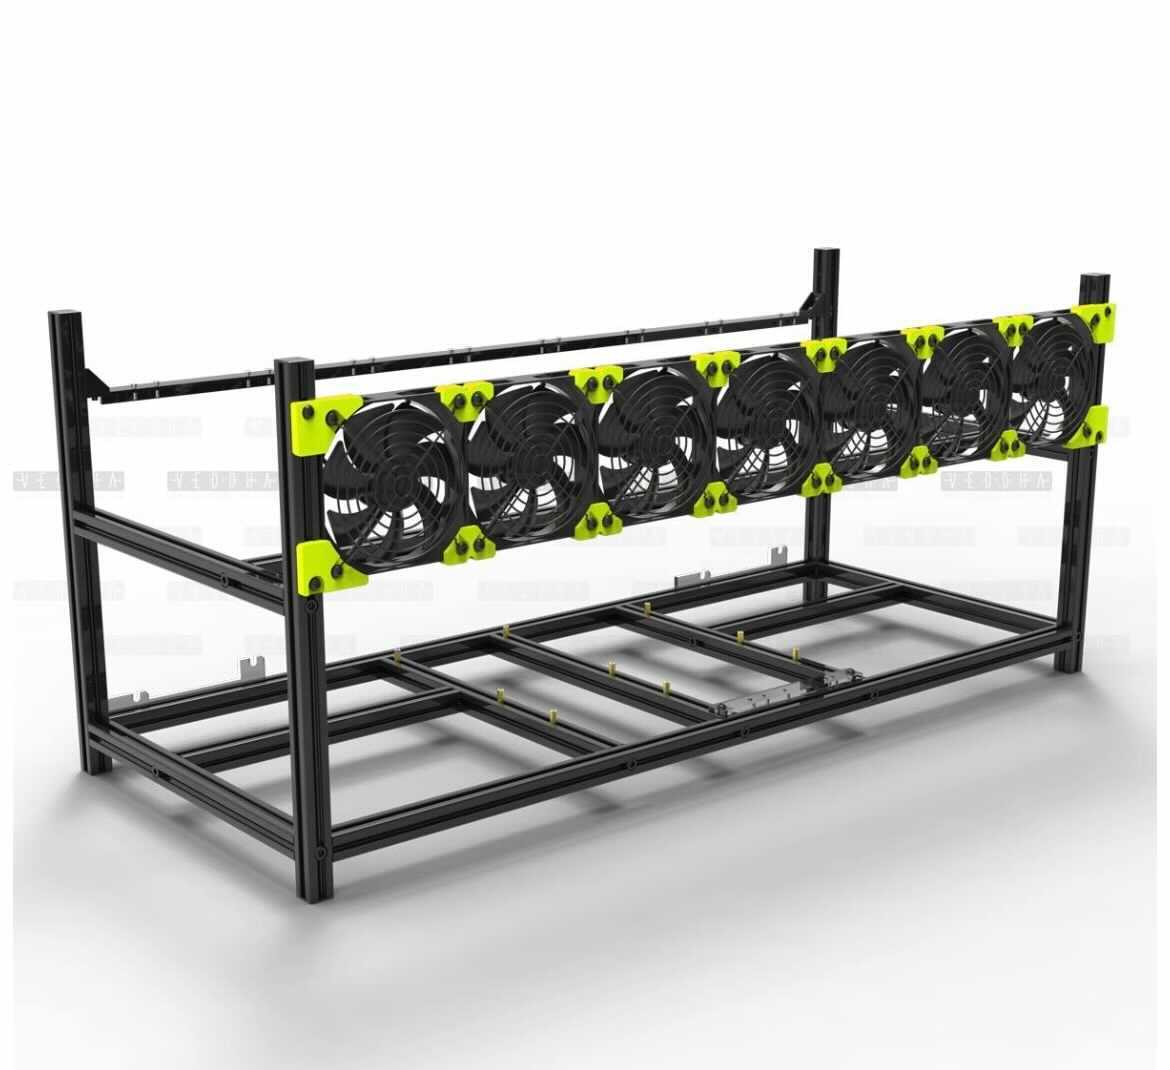 Veddha 8 GPU Miner Case Aluminum Stackable Mining Rig Frame Open Air USA STOCK!!